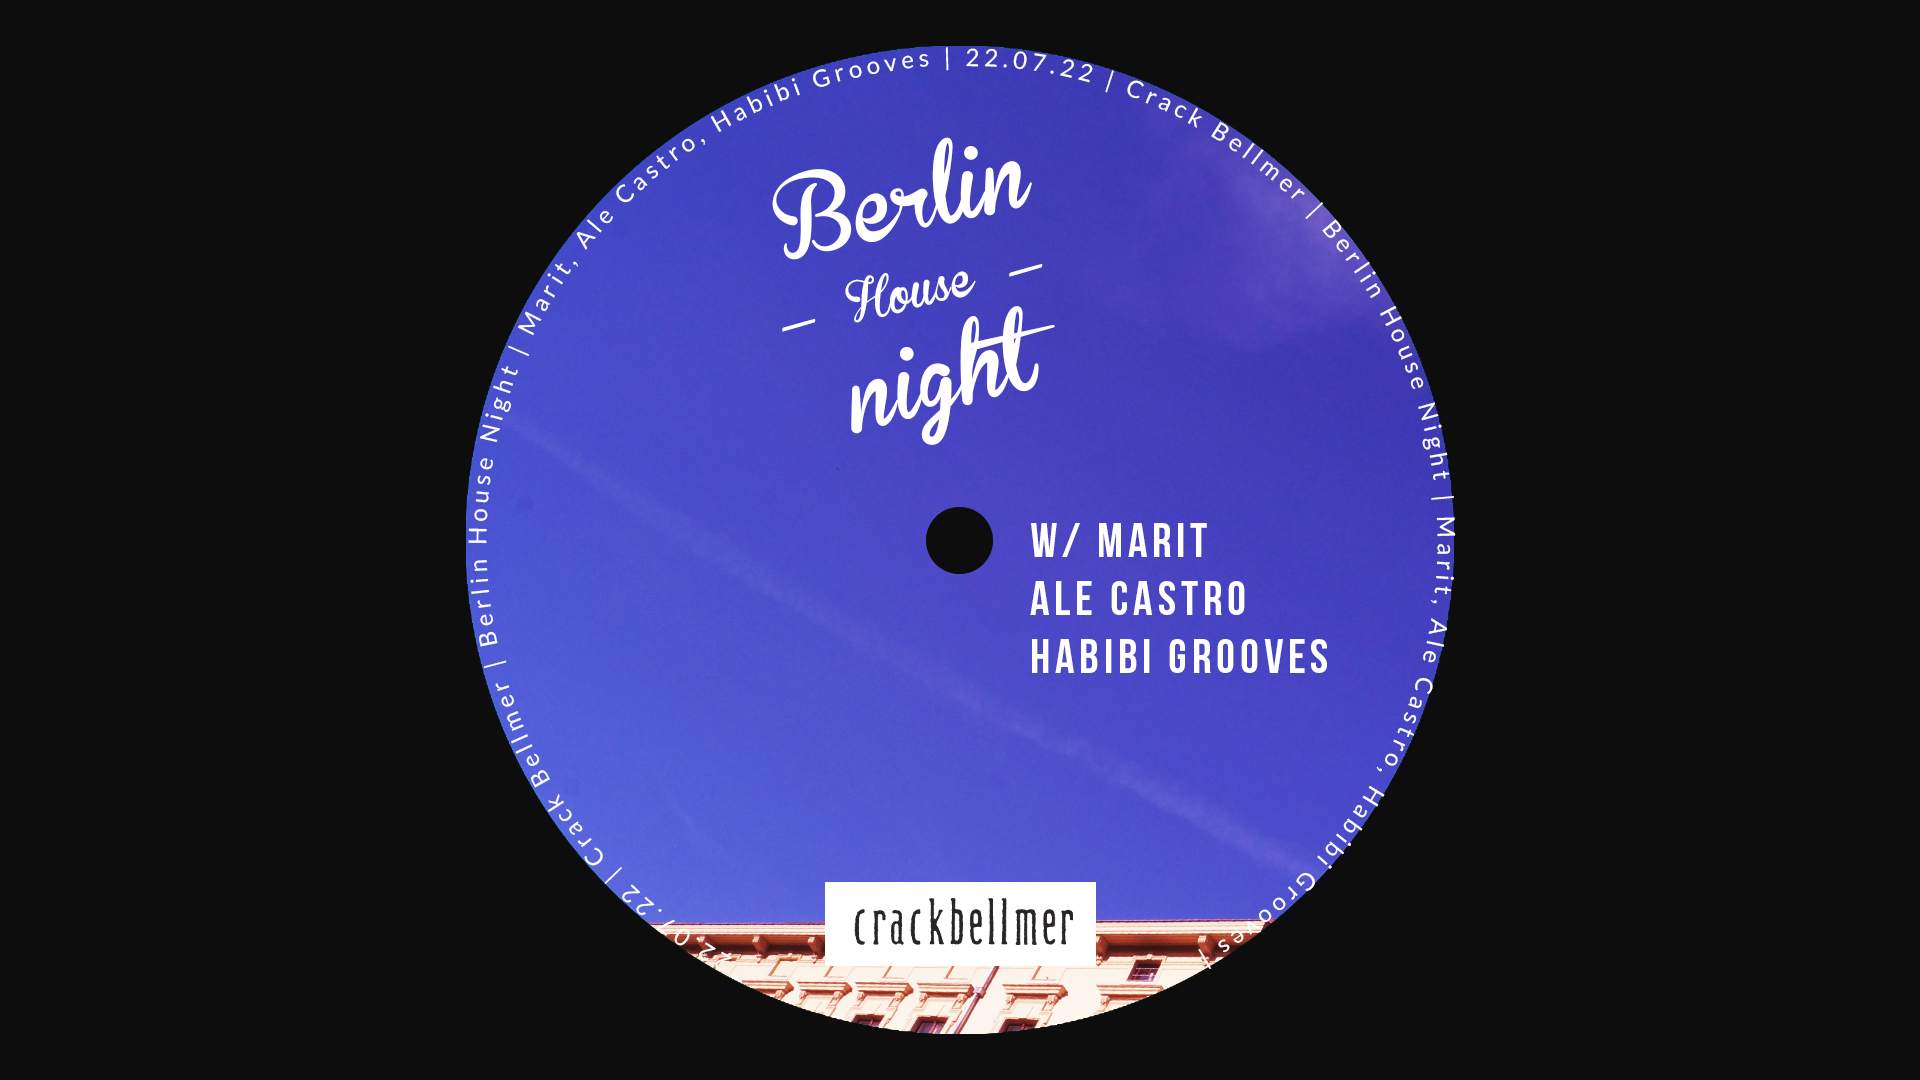 Berlin House Night with Marit, Ale Castro, Habibi Grooves - Página frontal